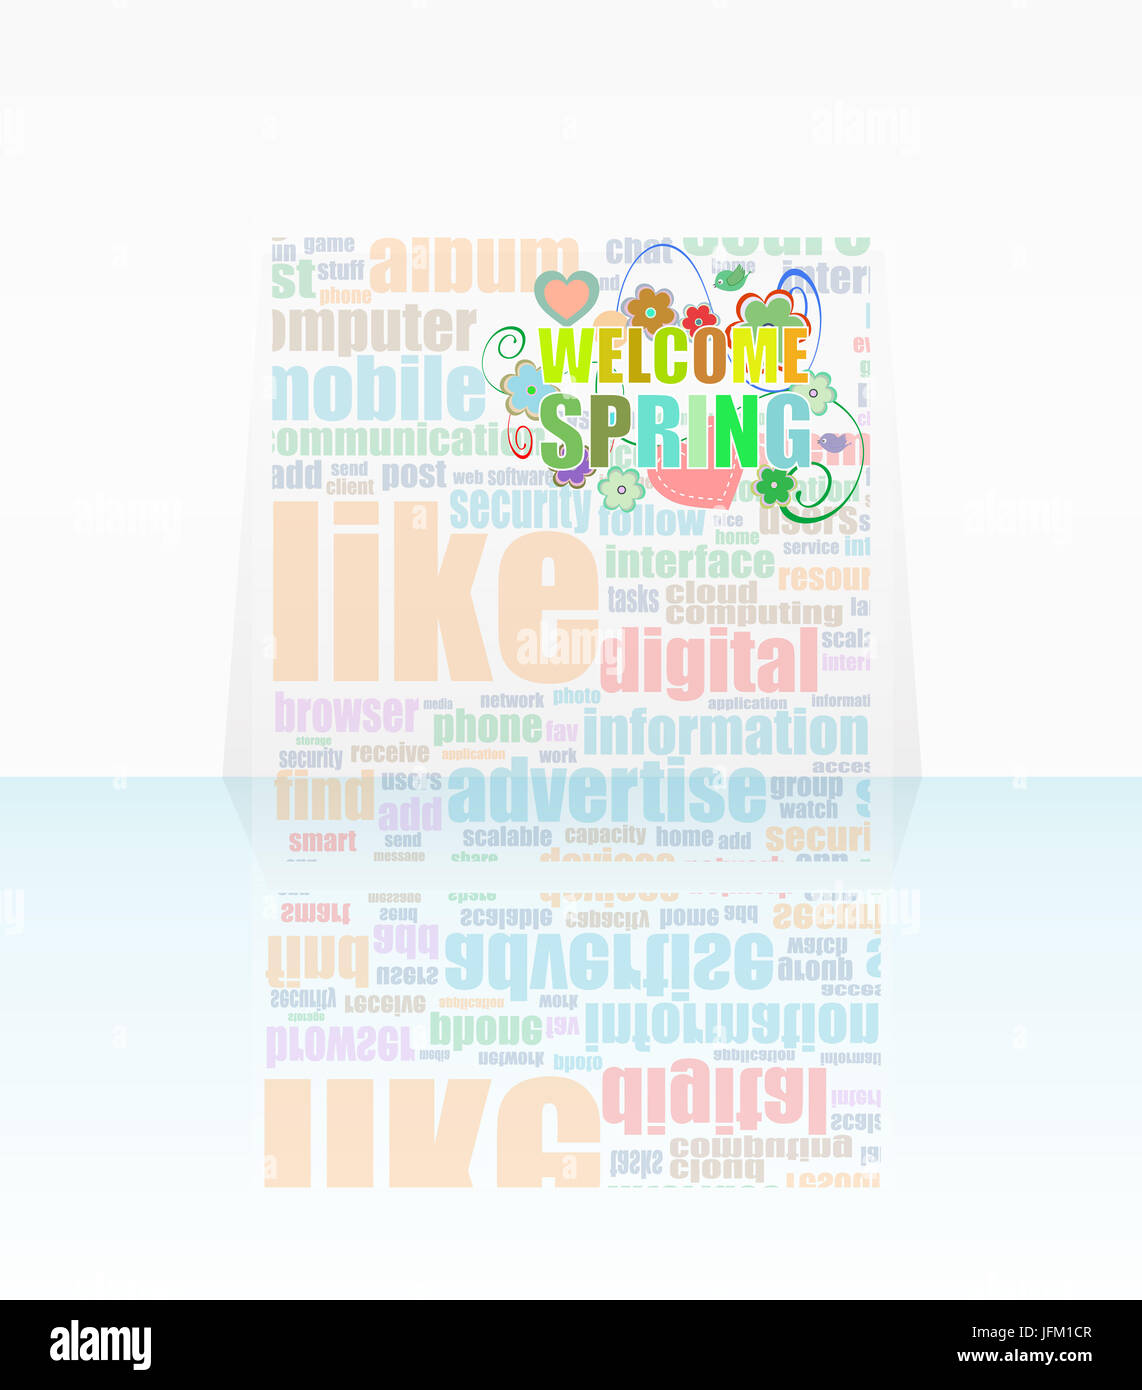 Welcome Spring Holiday Card Stock Photo